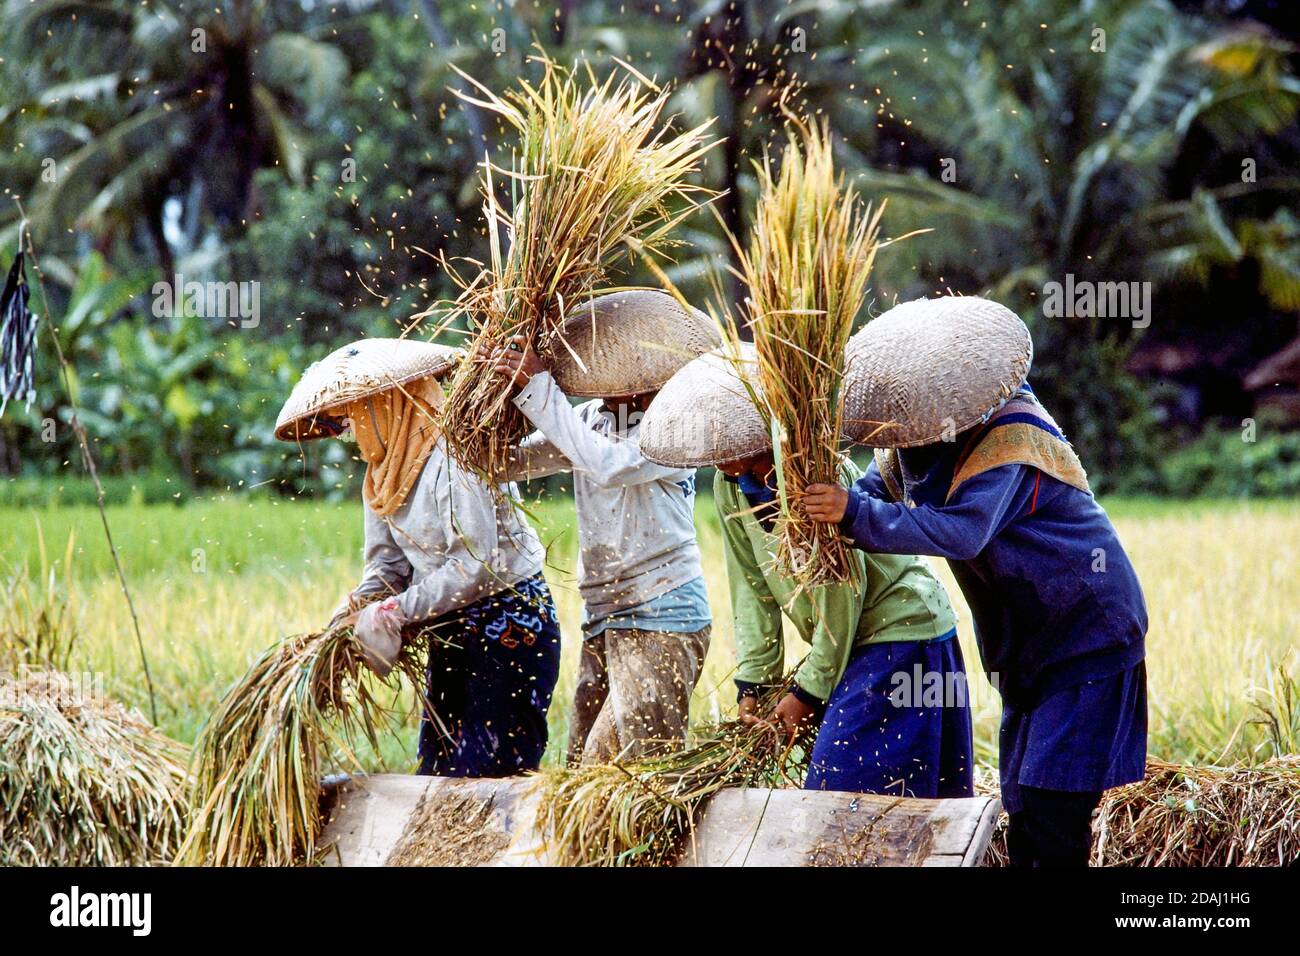 Bali, Indonesia. Women under large straw hats in a paddy field are beating rice grains out of rice ears Stock Photo